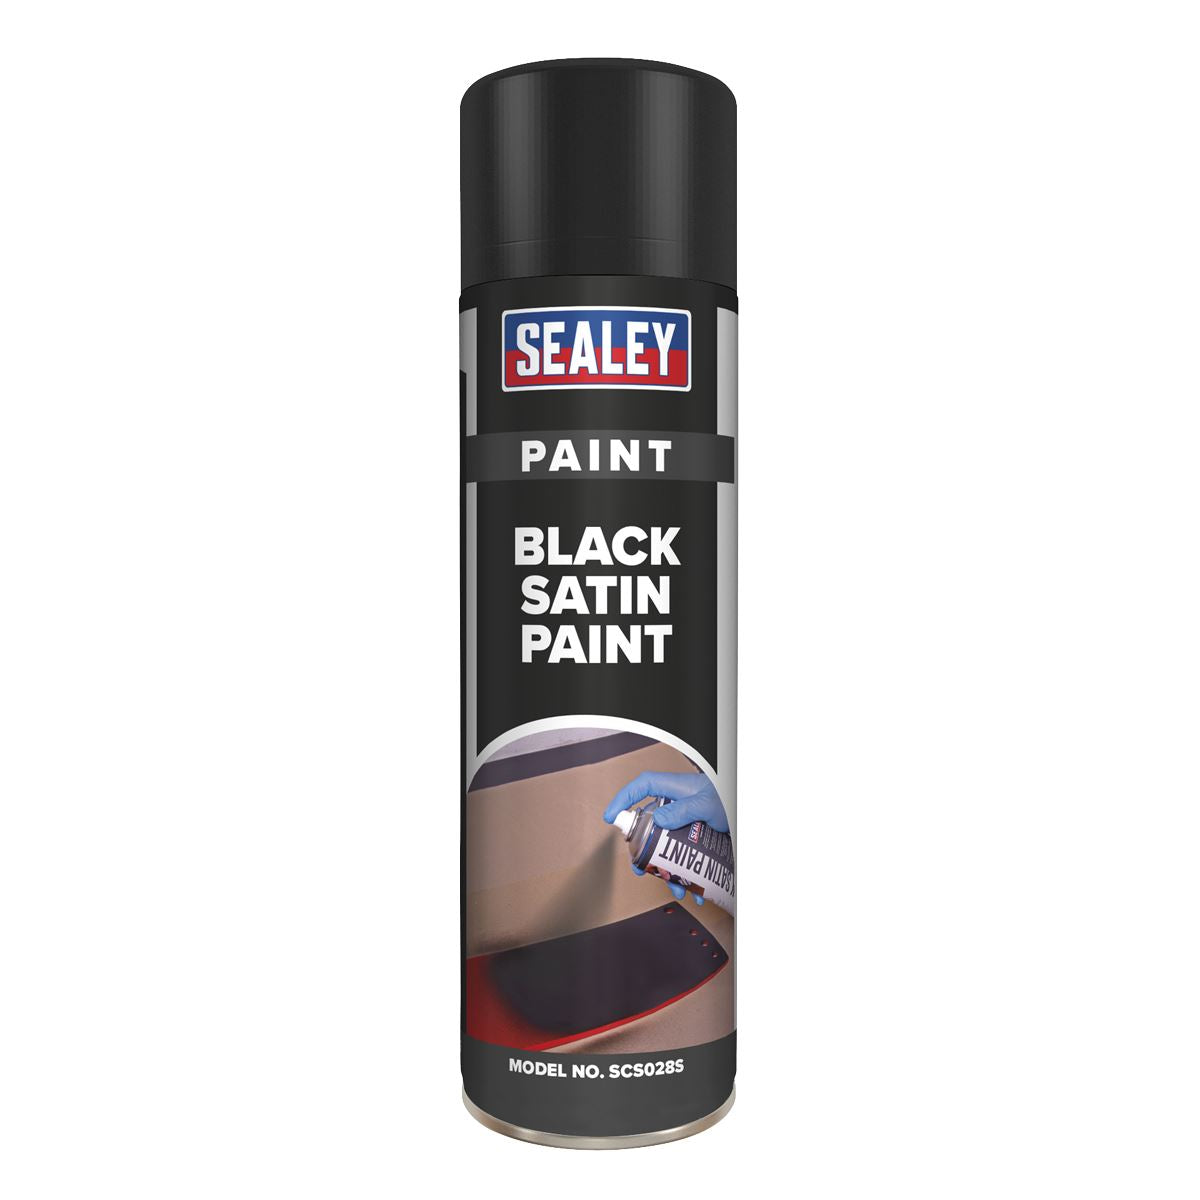 Sealey Black Satin Spray Paint 500ml for Metal Wood Plastic Fast Drying